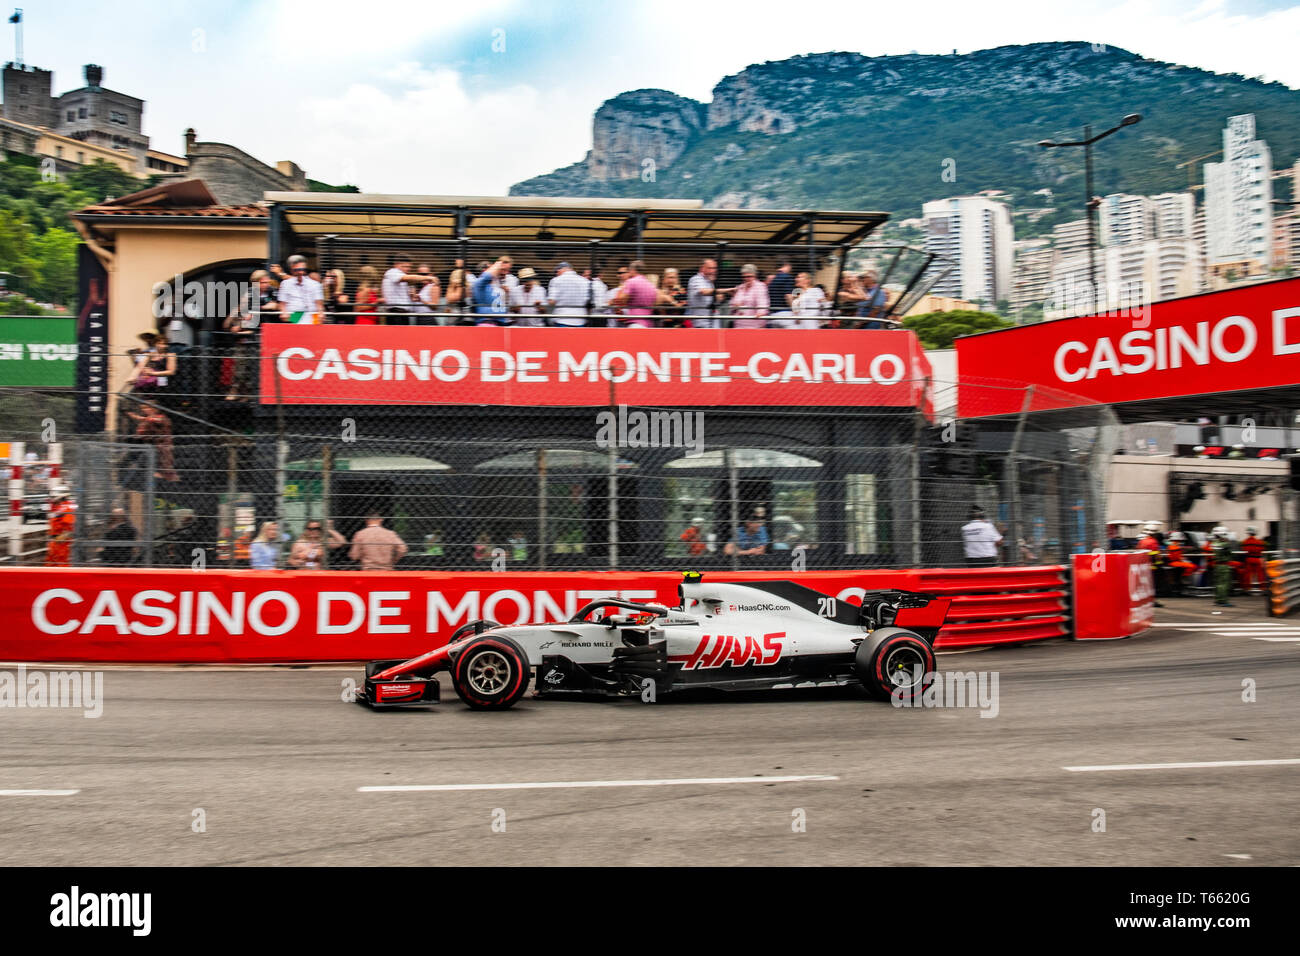 La Rascasse High Resolution Stock Photography and Images - Alamy